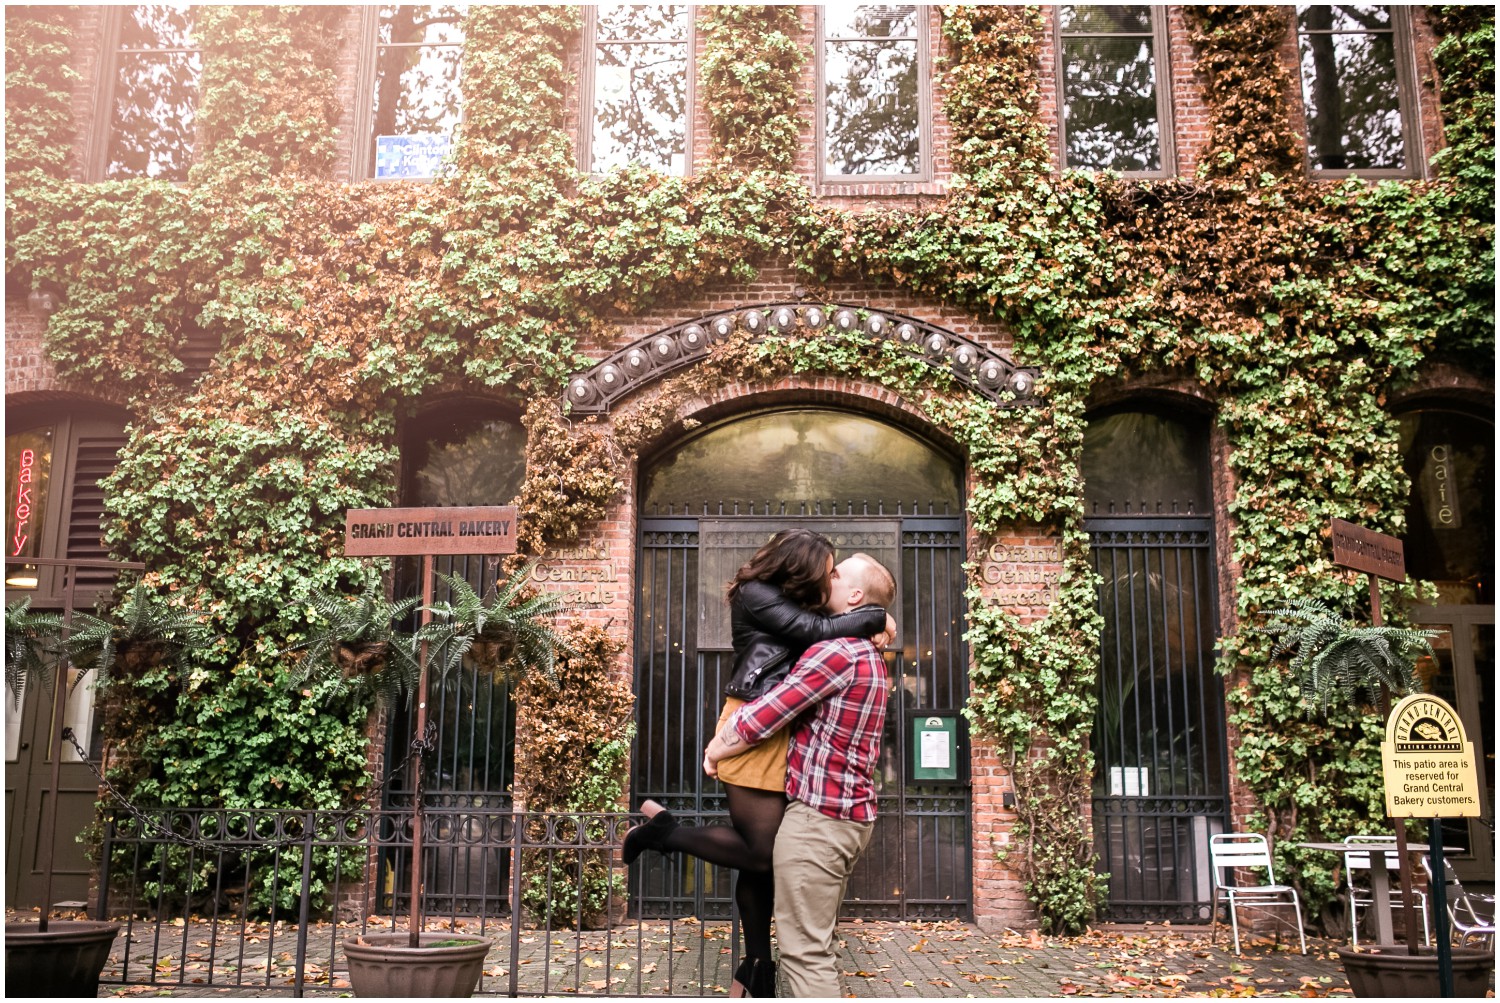 A Magical Rainy Engagement Session in Downtown Seattle